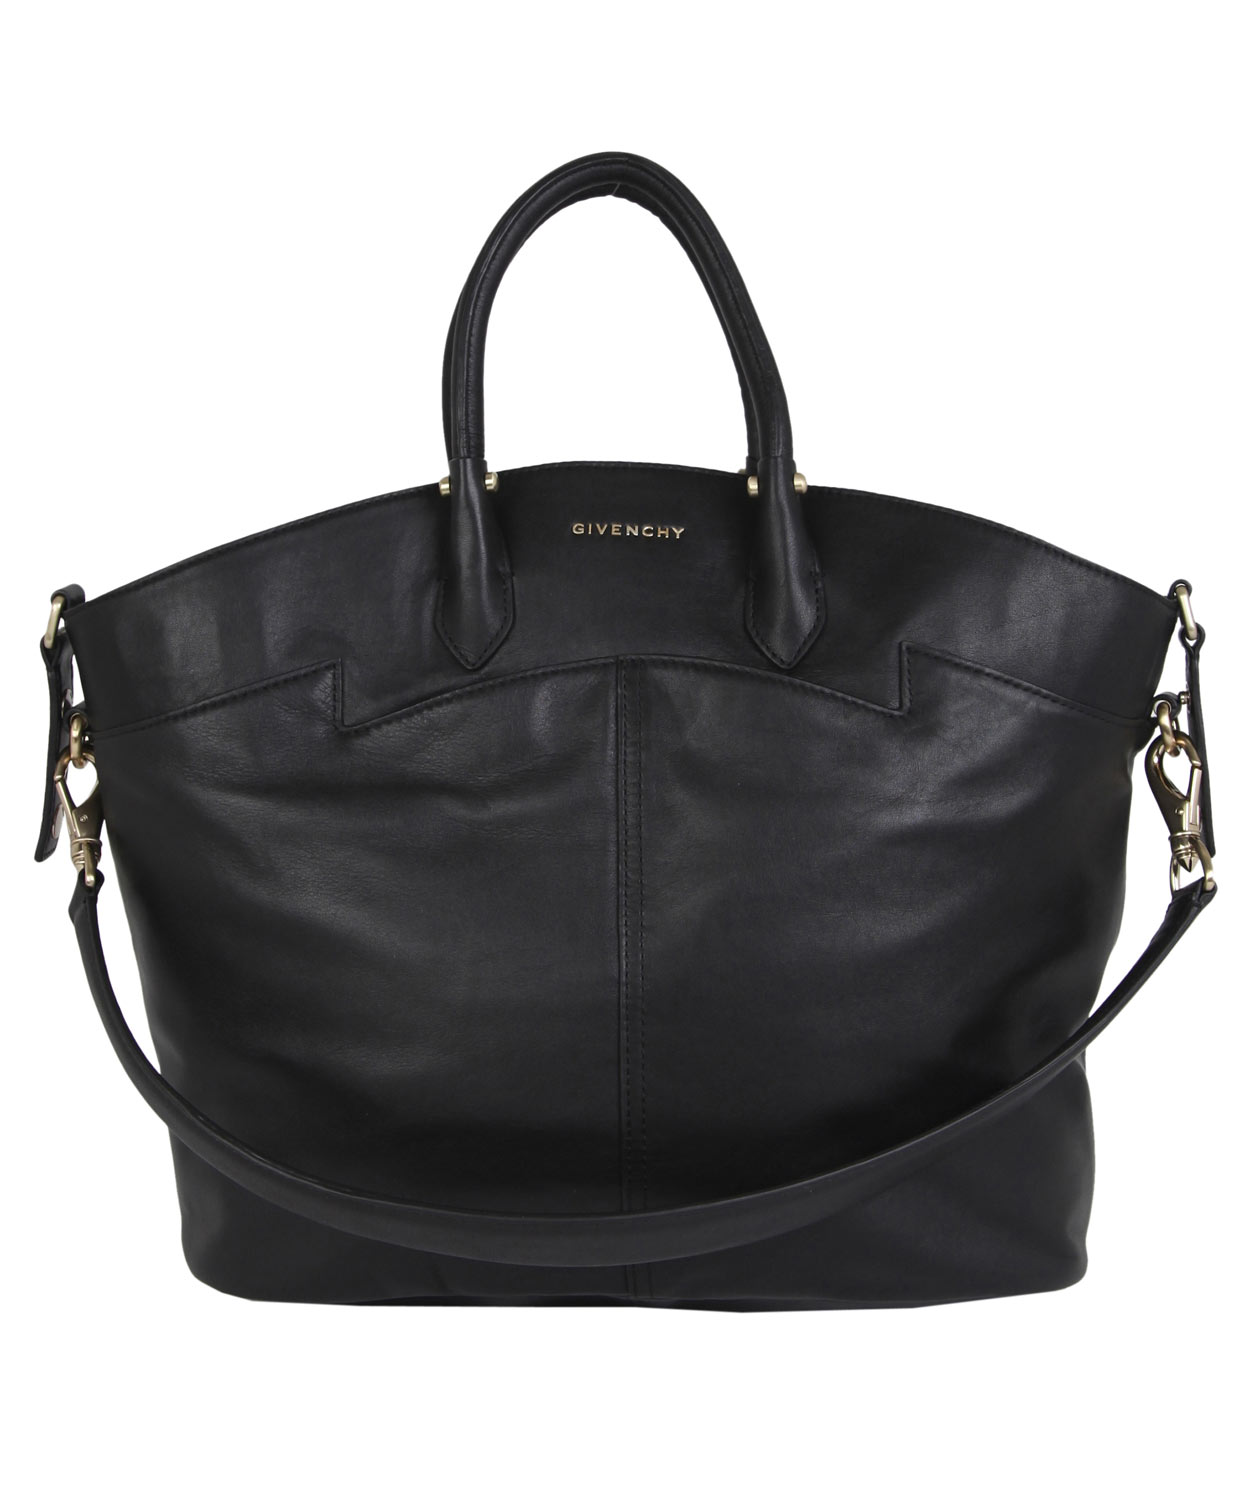 Givenchy Large Black Leather Tote Bag in Black | Lyst